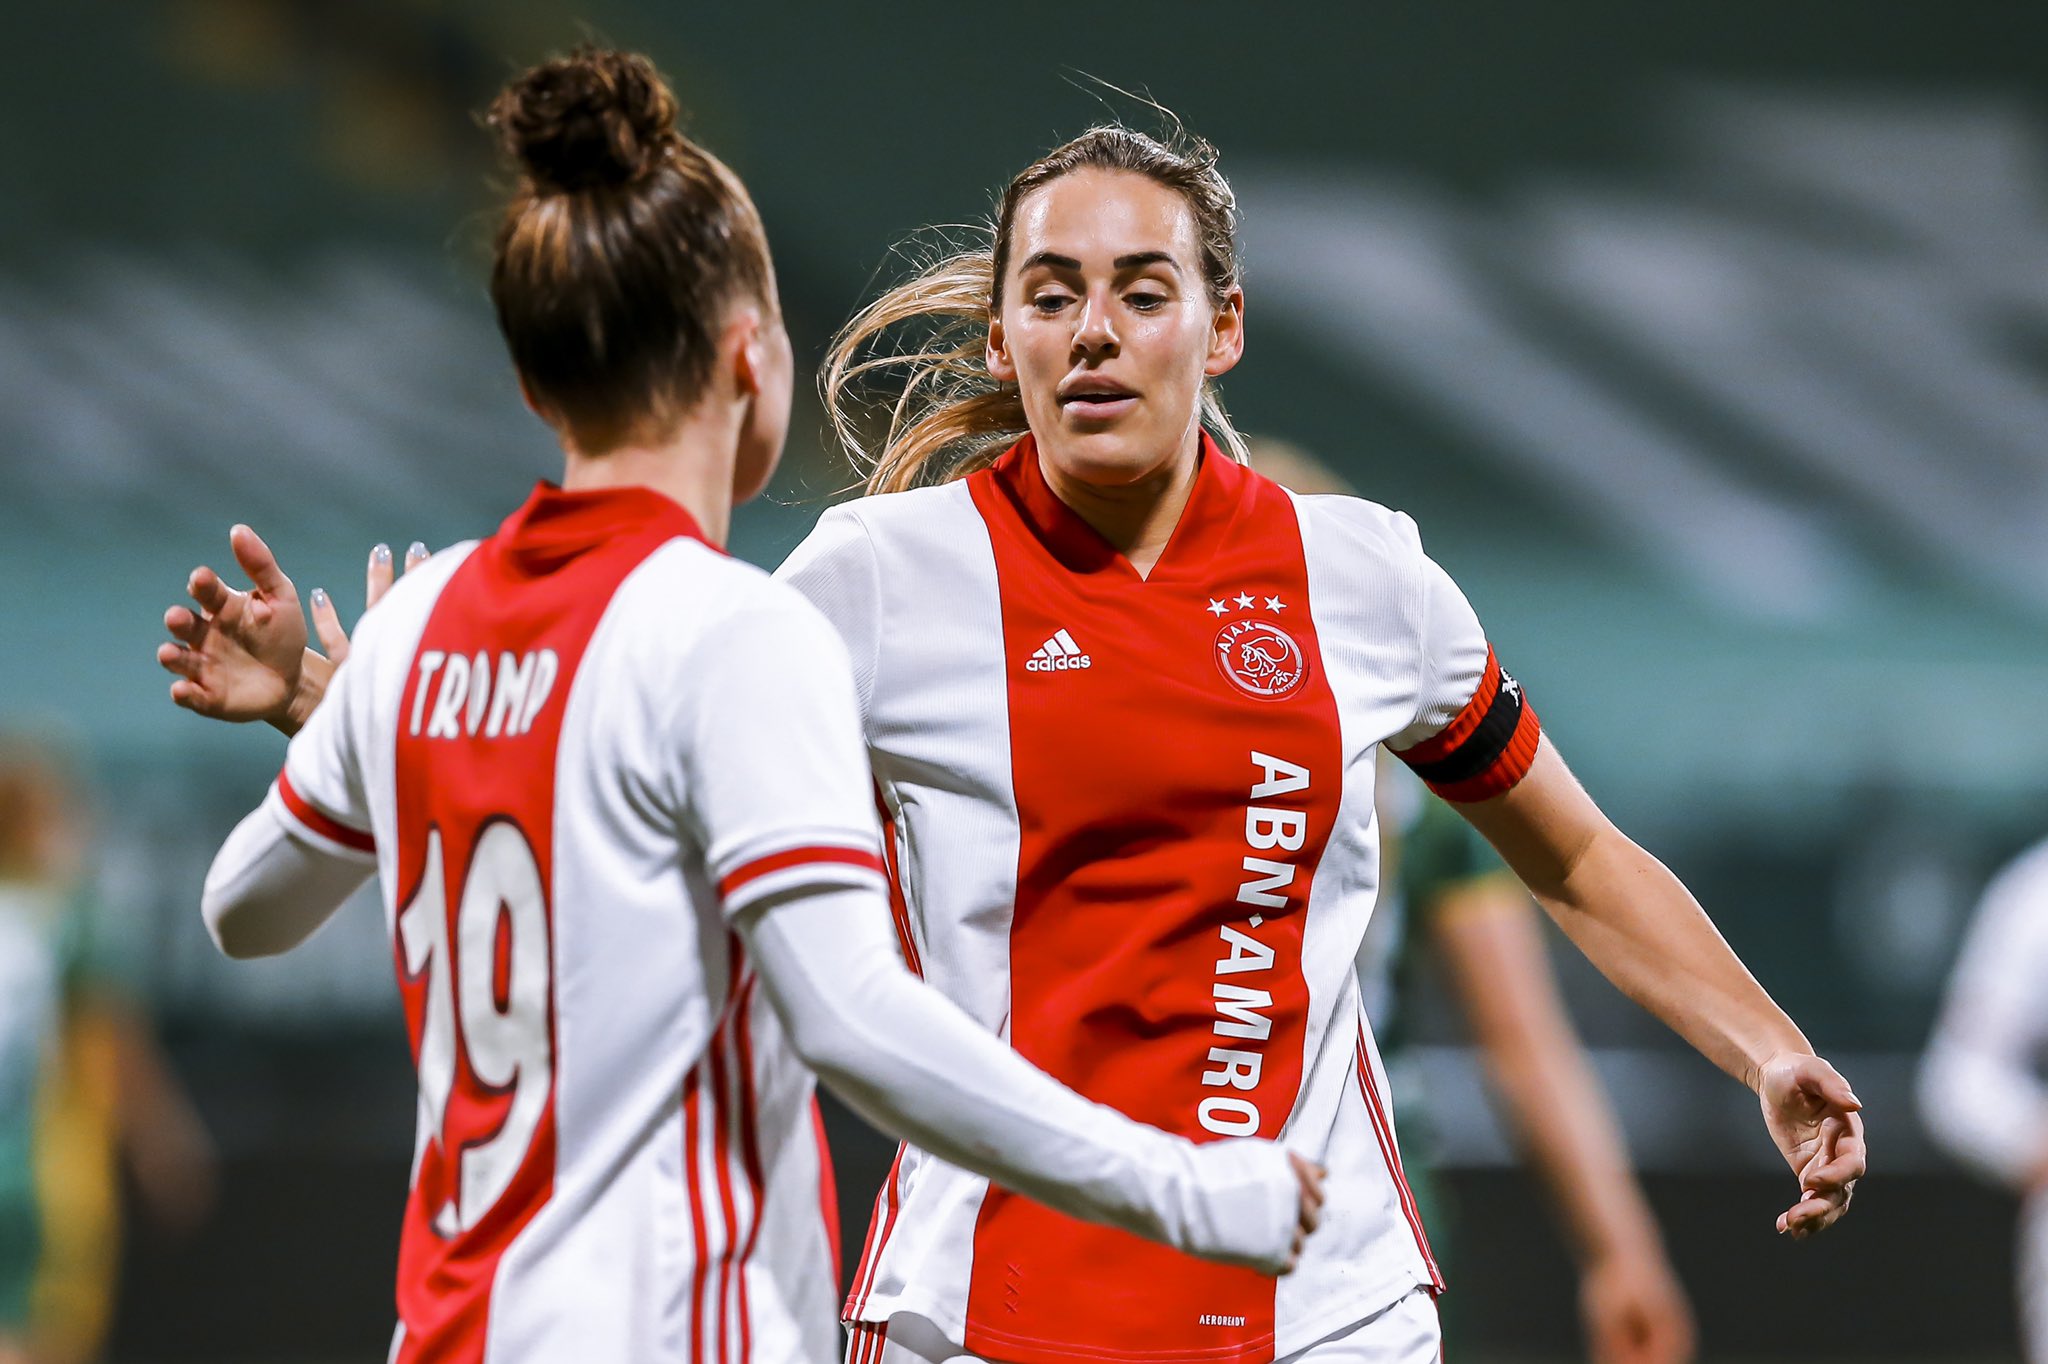 Kiwi Consulaat Auckland AFC Ajax on Twitter: "Some girls are on fire... @AjaxVrouwen ➥ 7 games  played - 21 points 🔥 https://t.co/KtHOUx04Yq" / Twitter